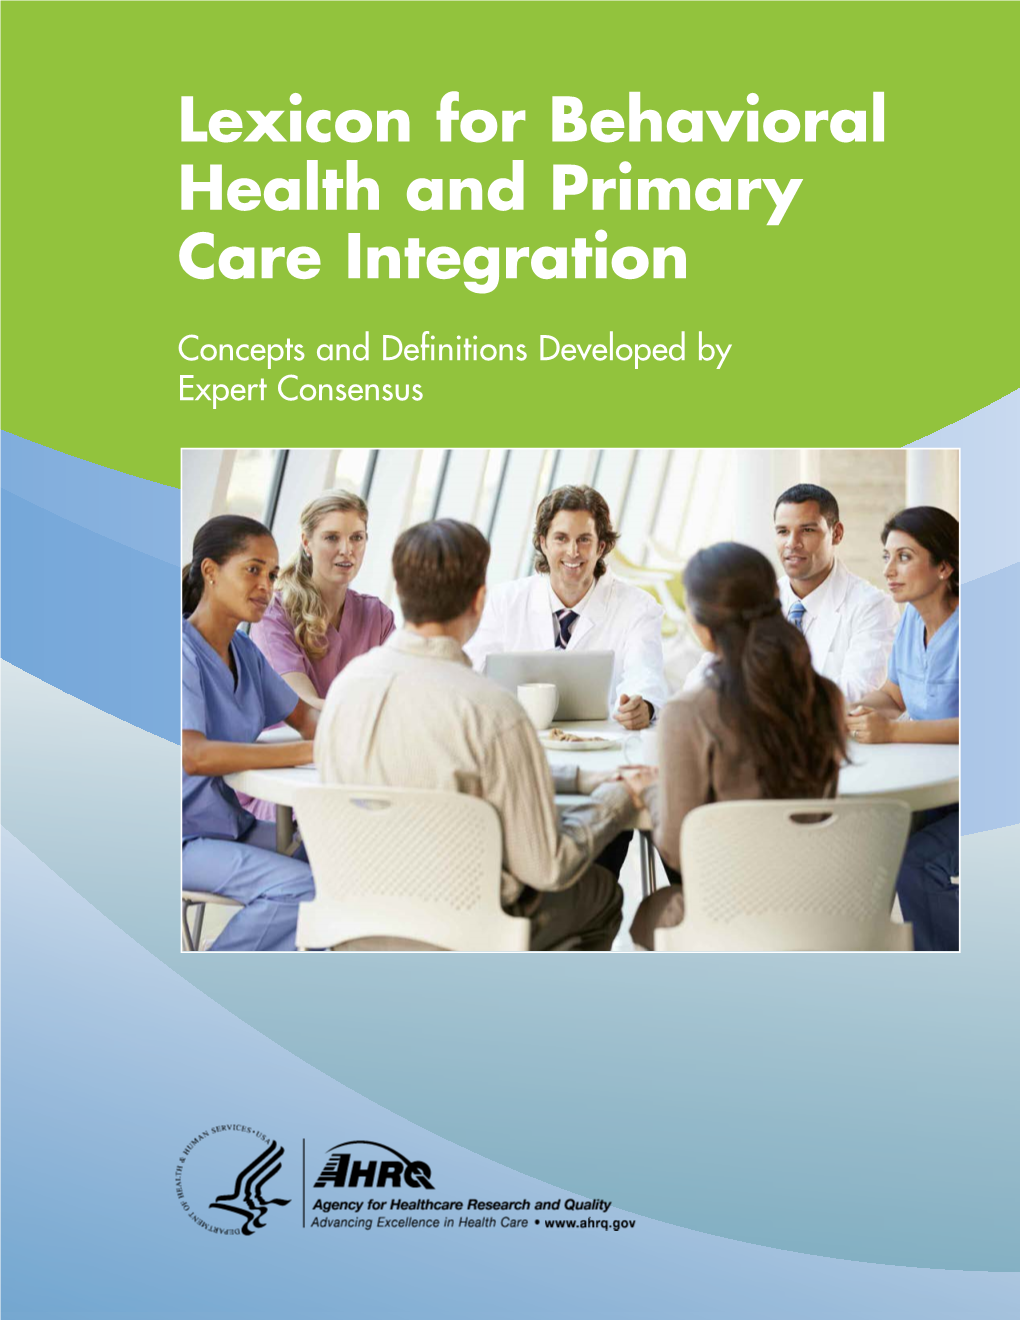 Lexicon for Behavioral Health and Primary Care Integration